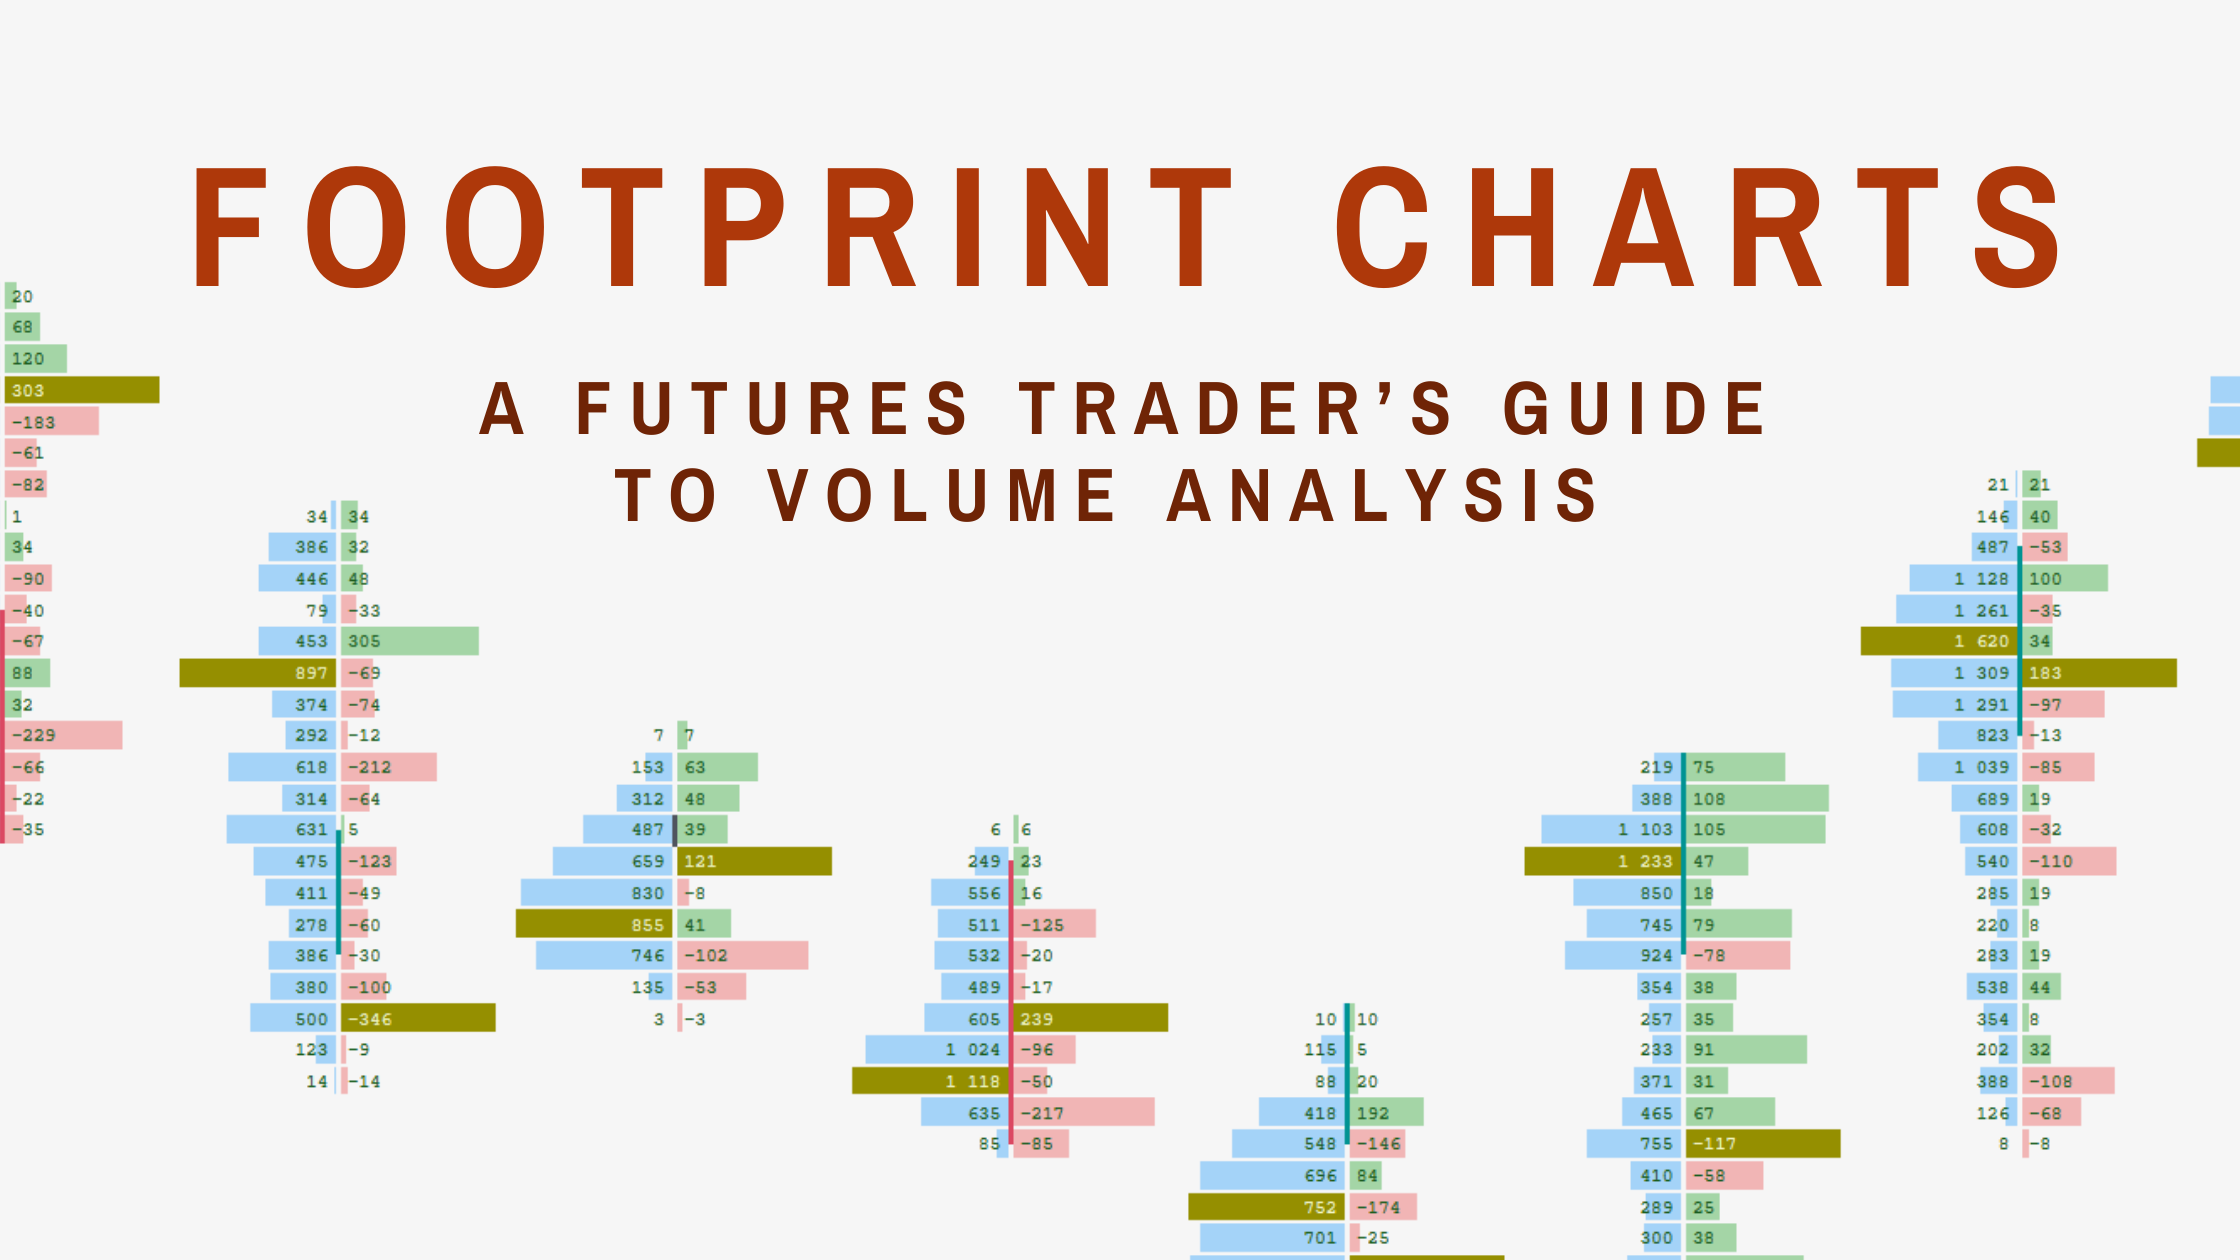 Footprint Charts A Futures Trader’s Guide to Volume Analysis